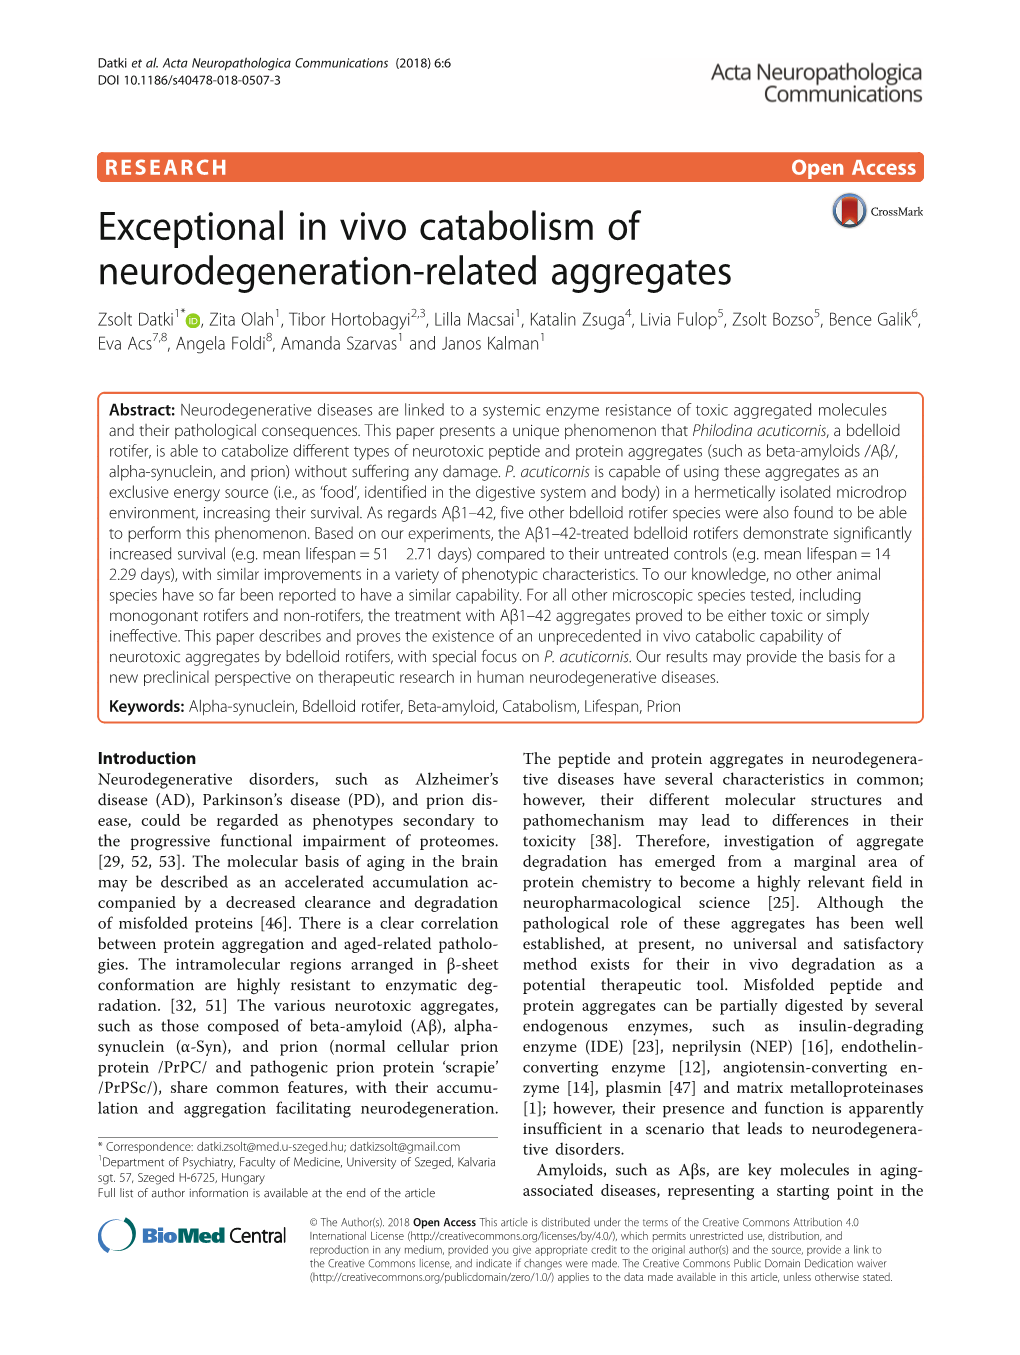 Exceptional in Vivo Catabolism of Neurodegeneration-Related Aggregates